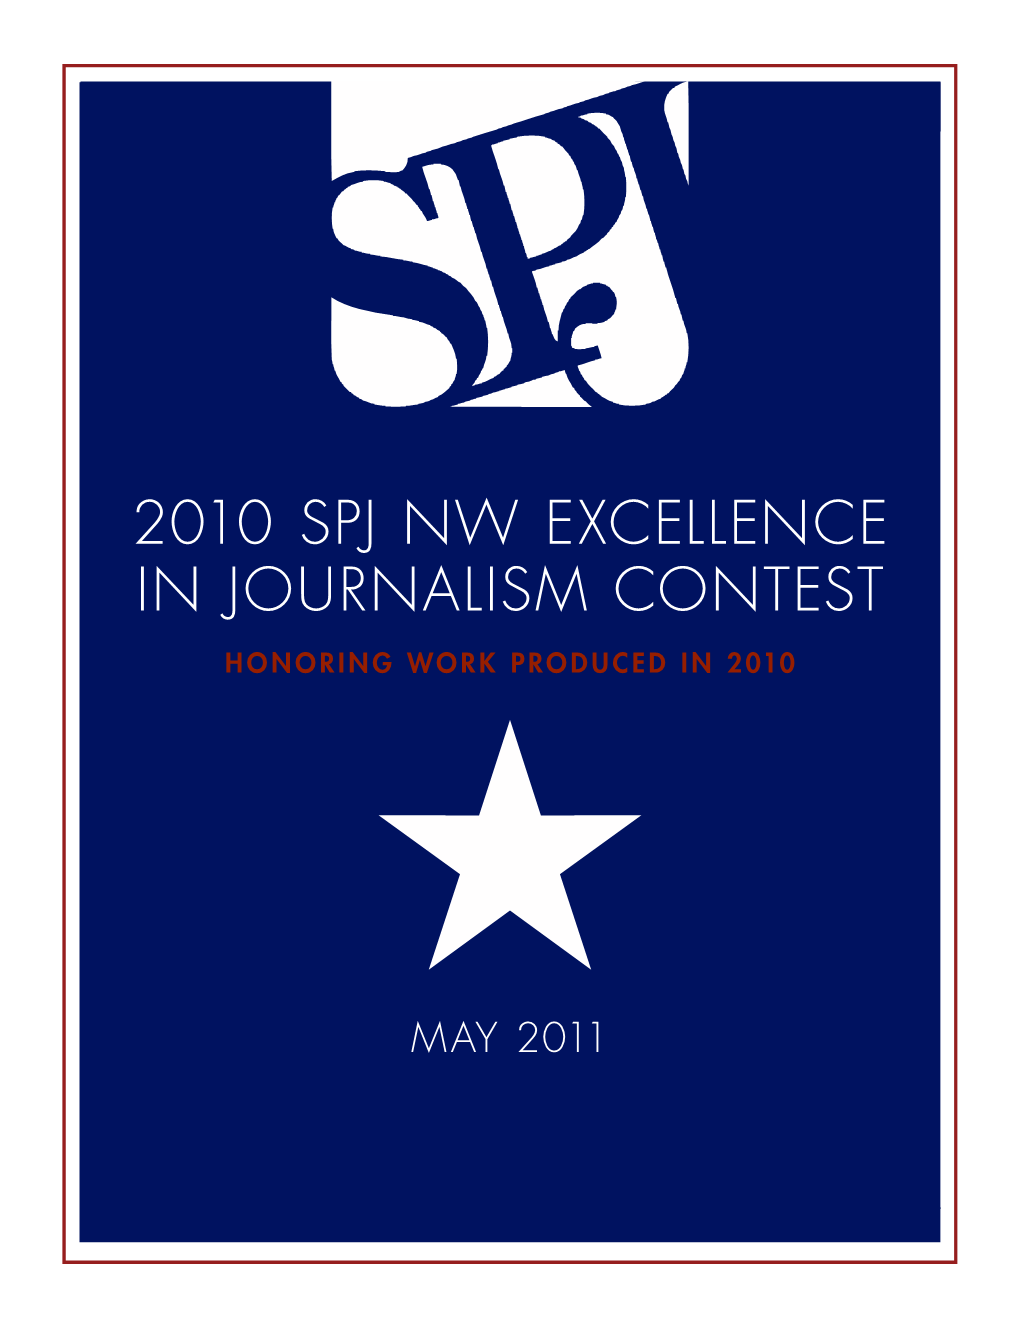 2010 Spj Nw Excellence in Journalism Contest Honoring Work Produced in 2010